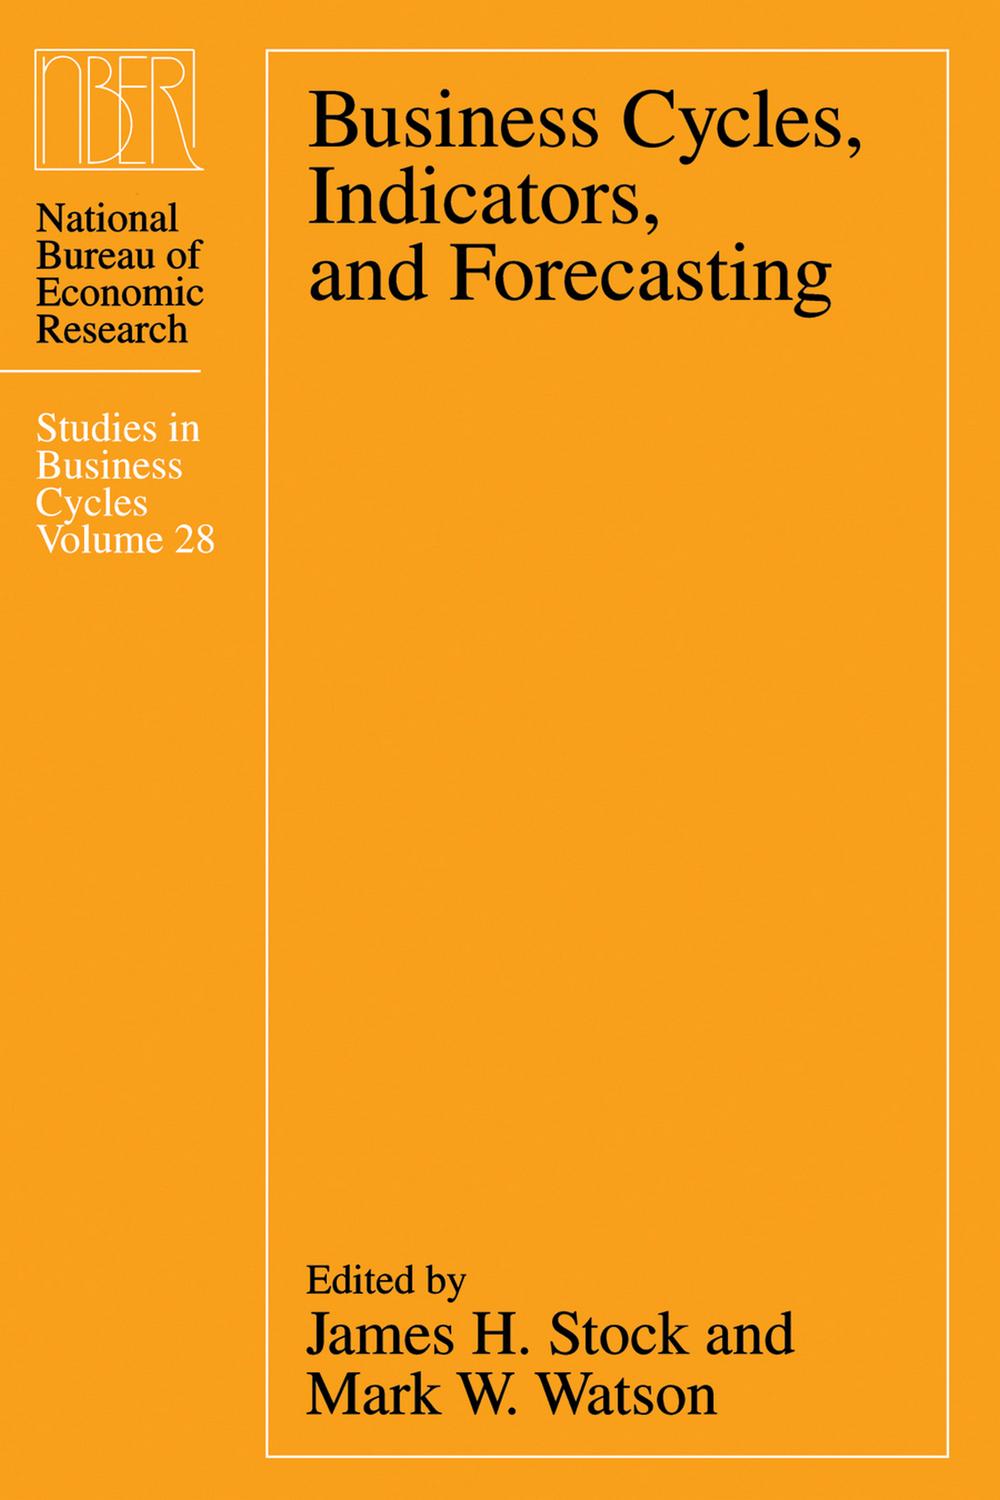 Business Cycles, Indicators, and Forecasting - James H. Stock, Mark W. Watson